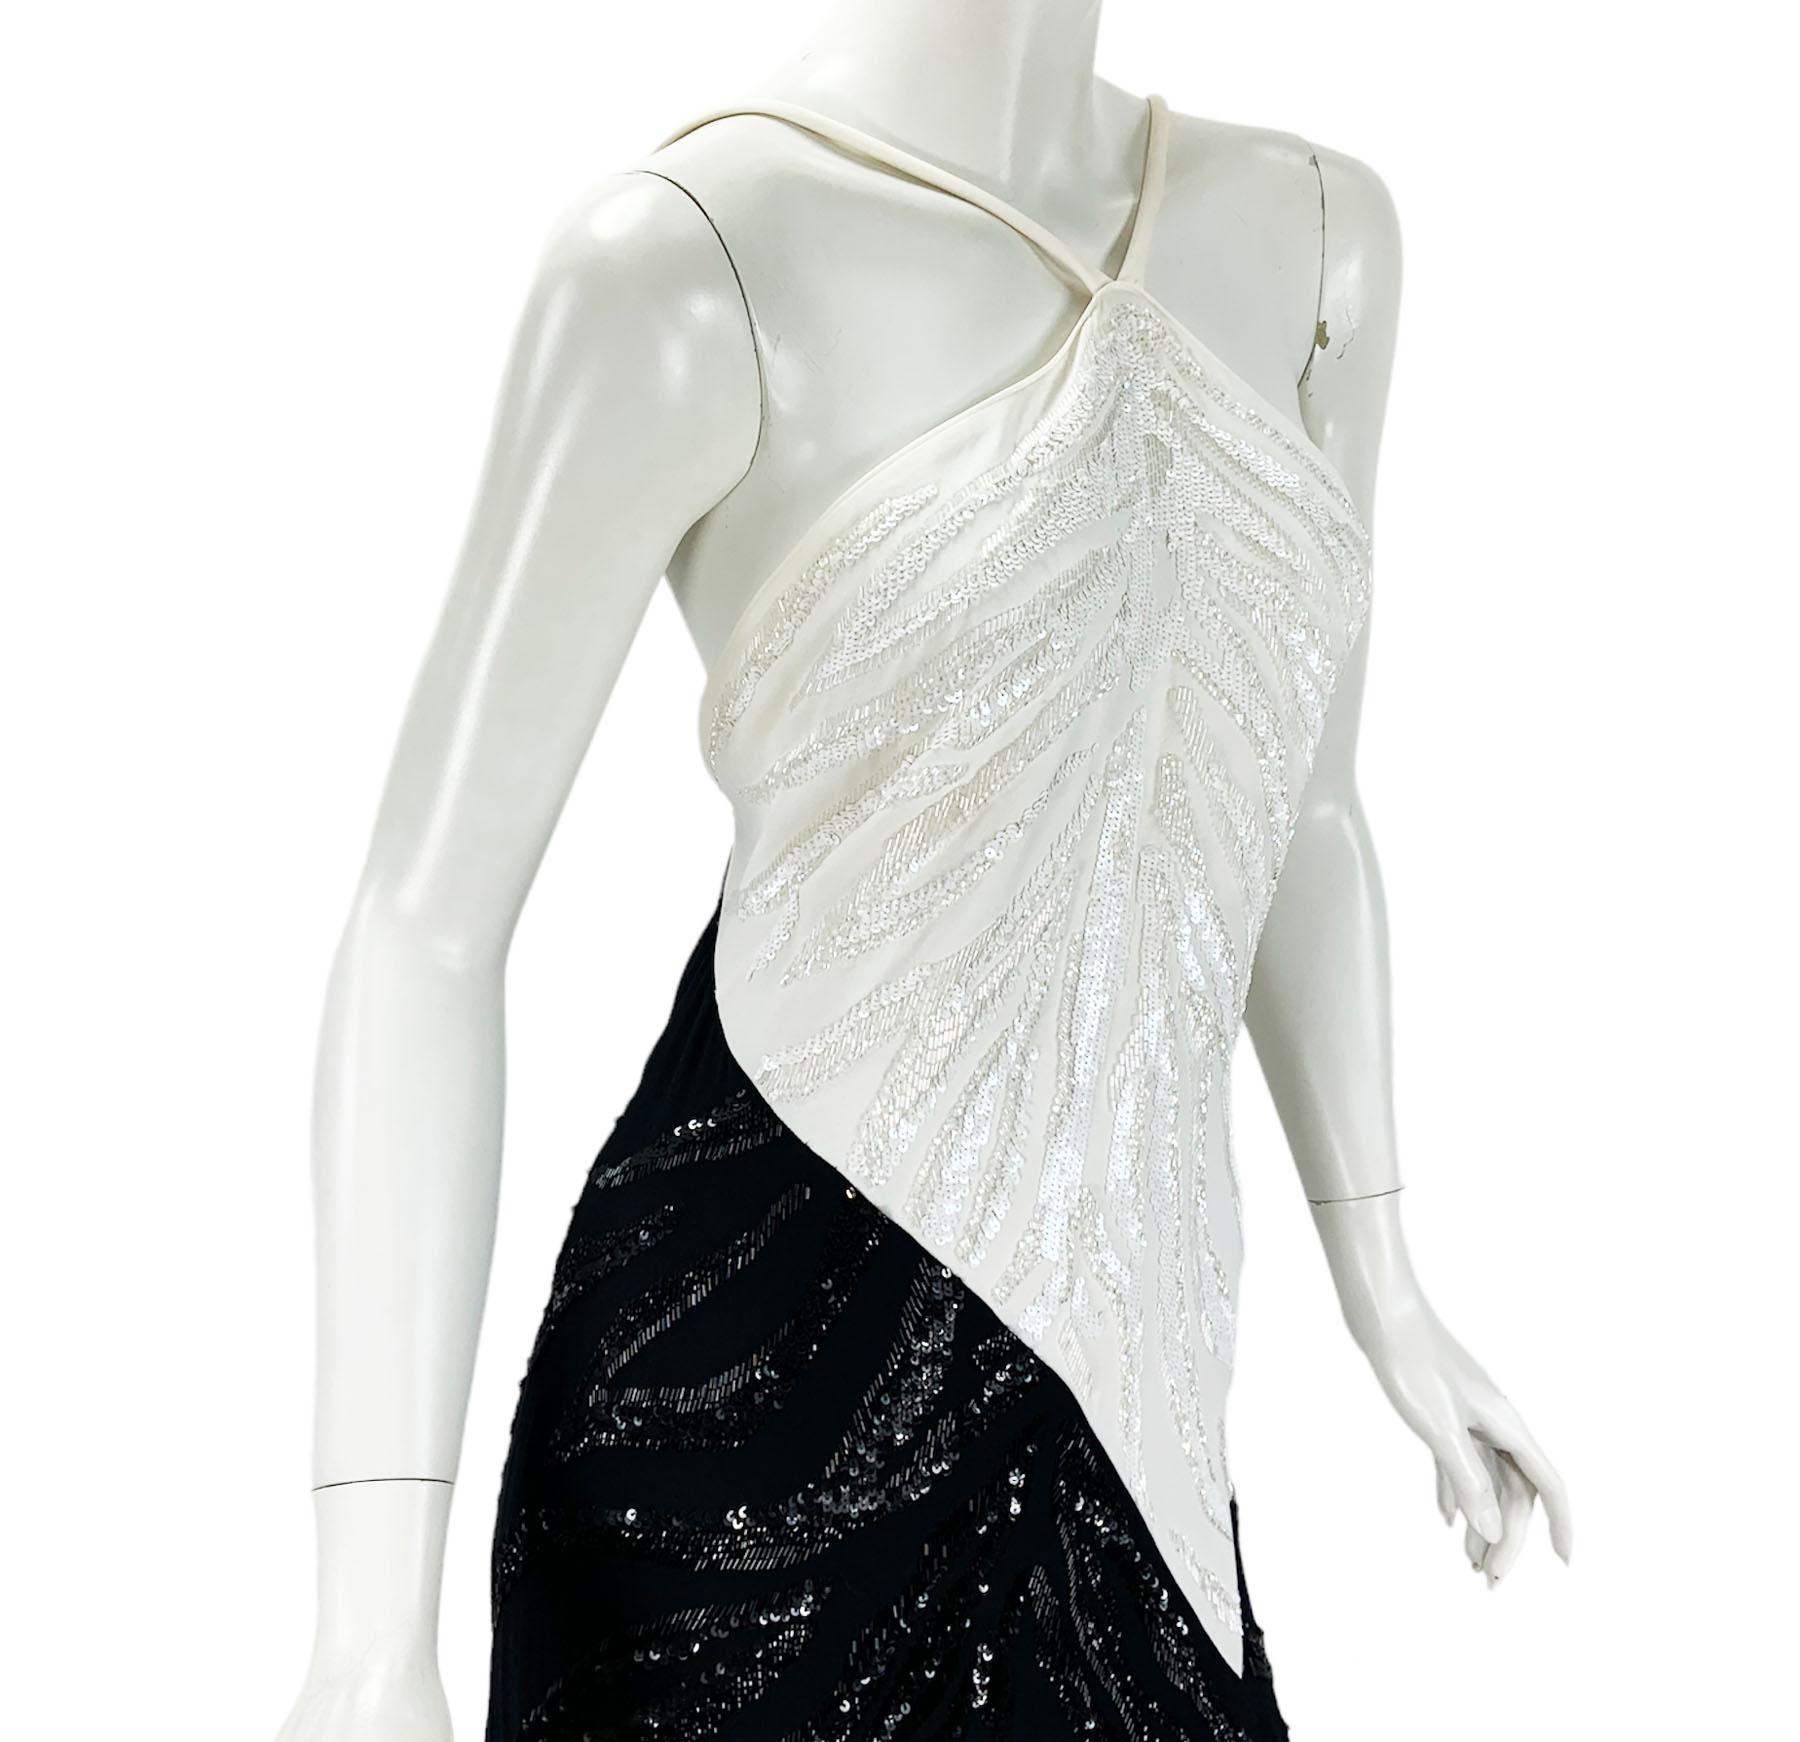 NWT Roberto Cavalli White Black Halter Embellished Maxi Dress Gown It 44 US 8/10 For Sale 4